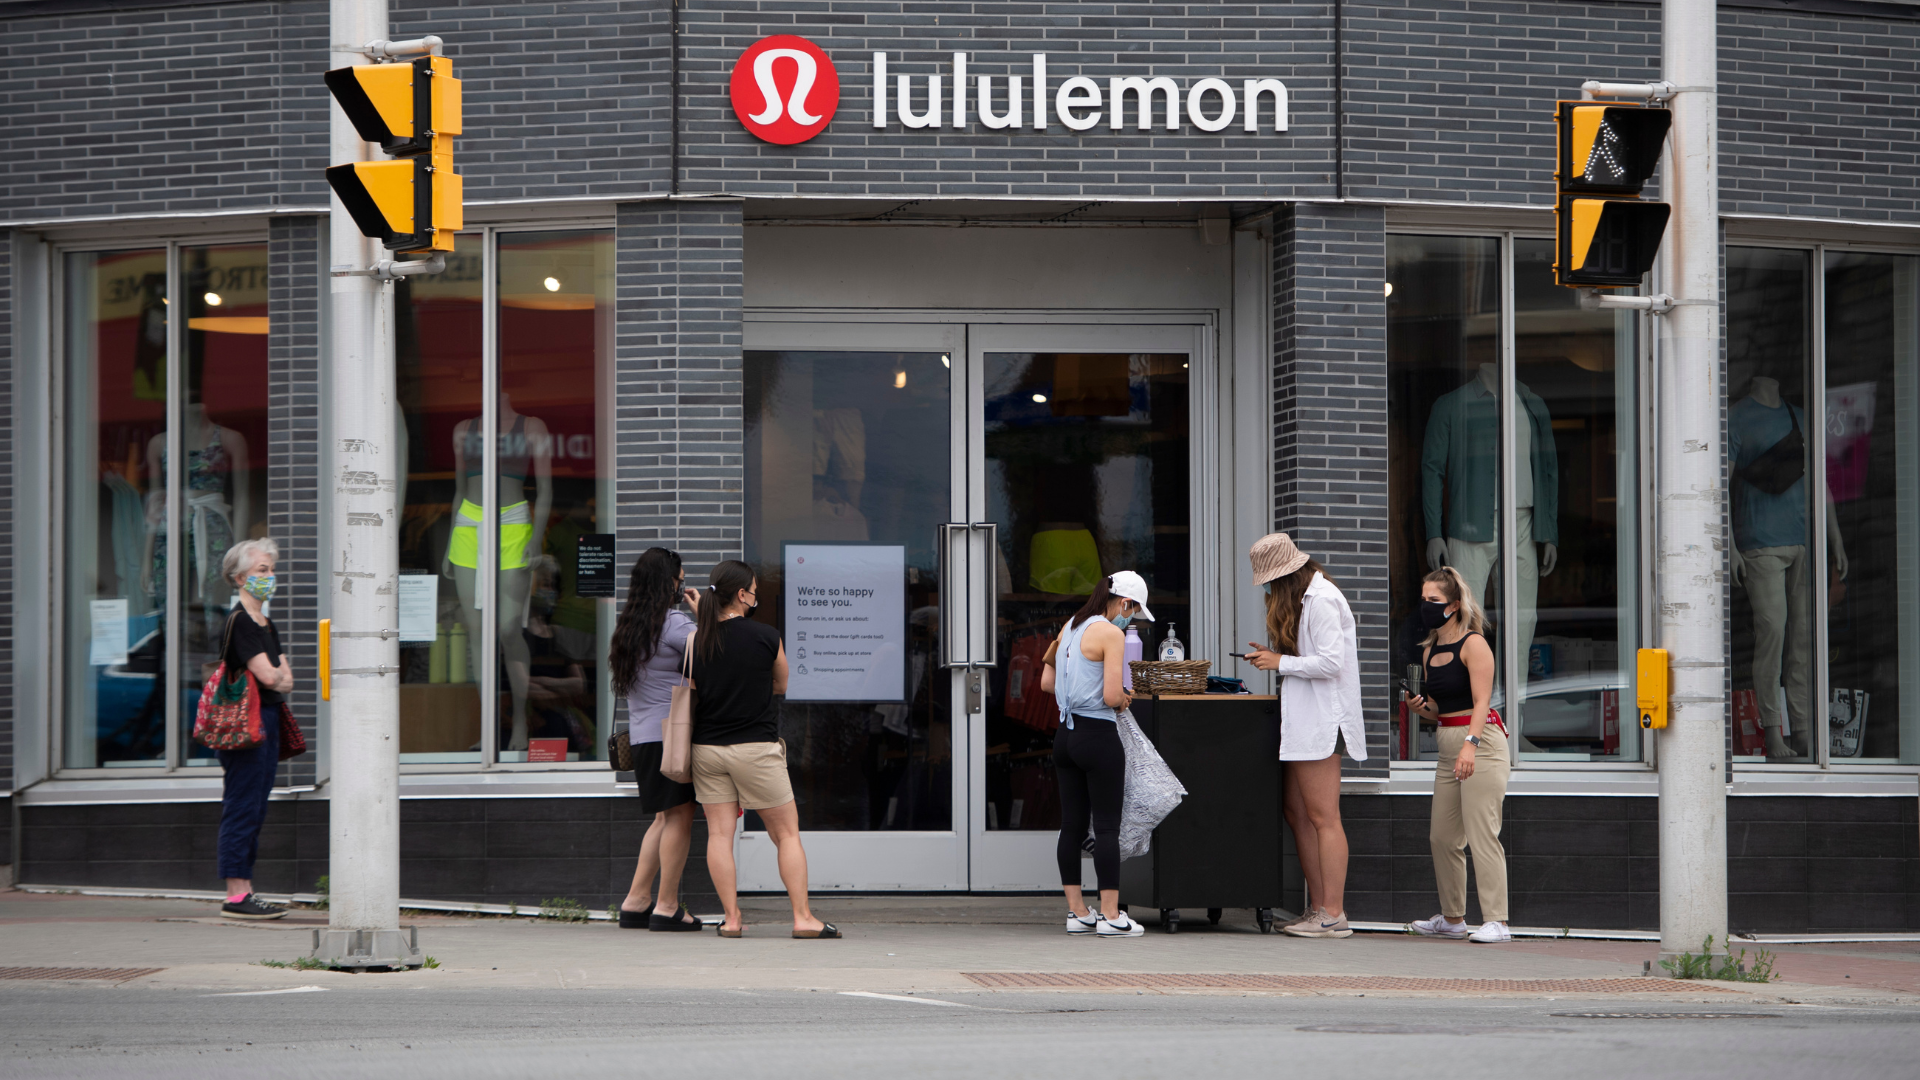 Lululemon CEO holds firm on decision to fire staff